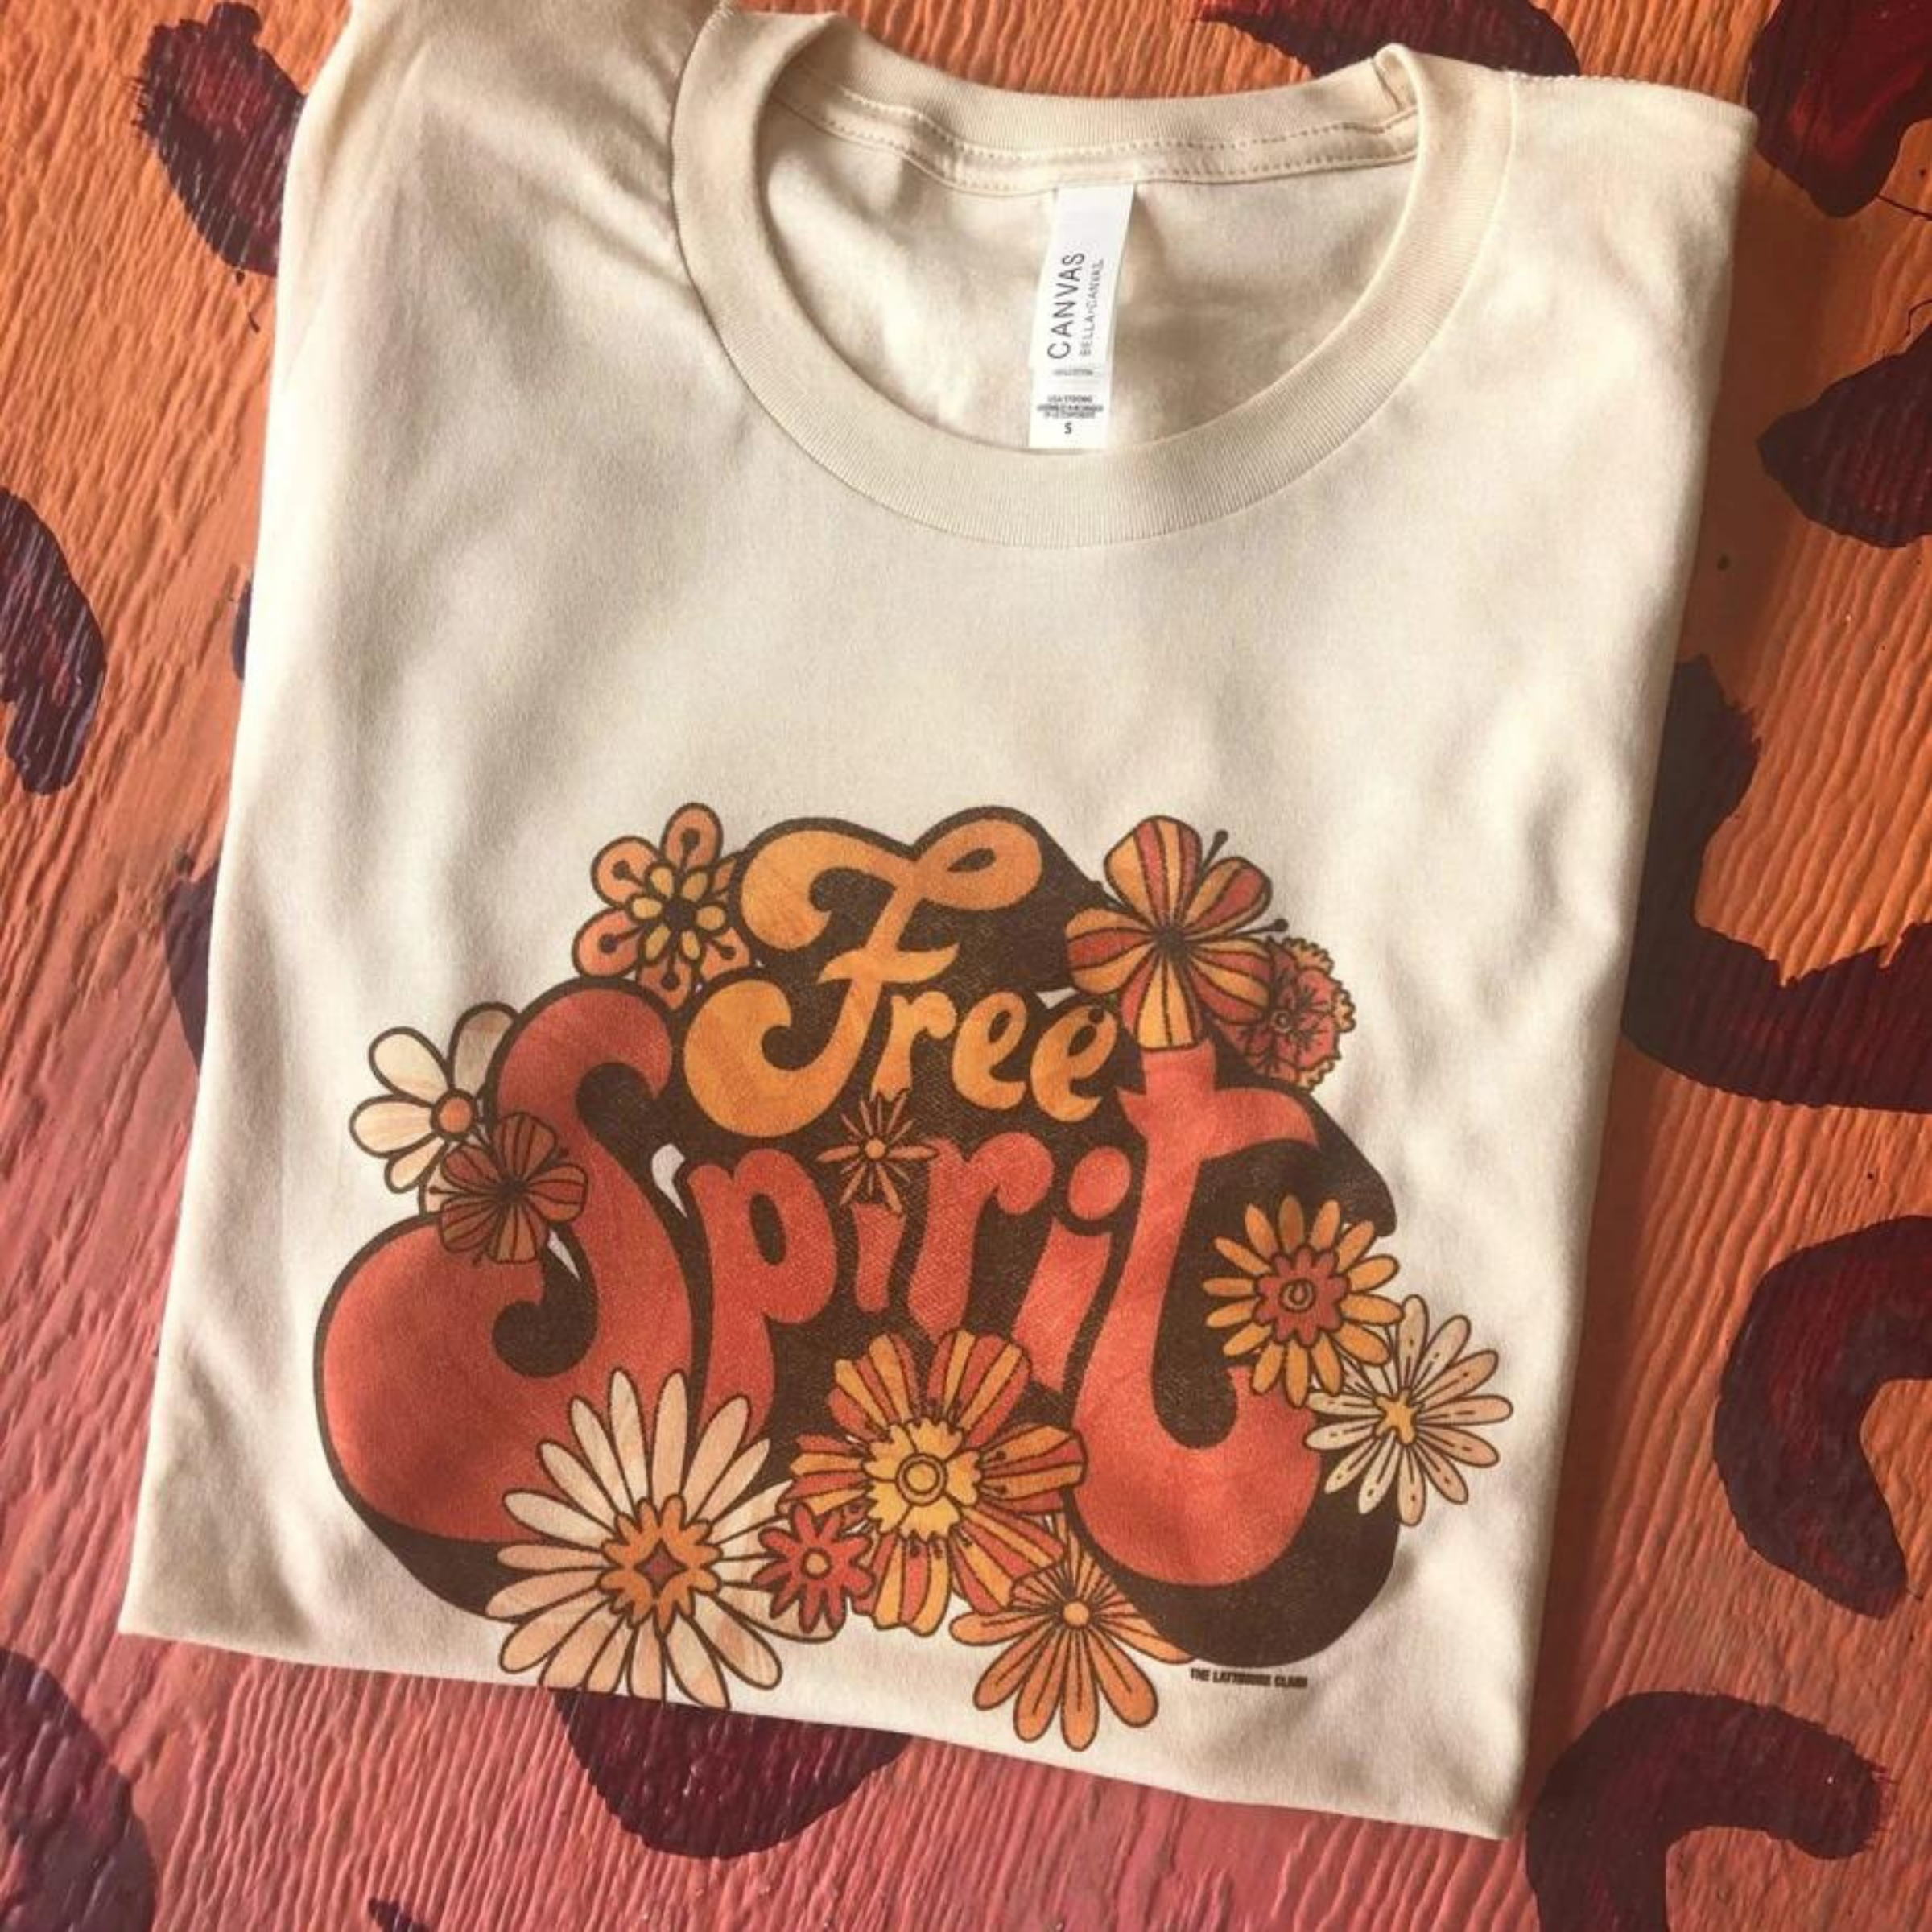 Ivory crew neck tee shirt that says "Free Spirit" in bubble letters and has flowers around it.